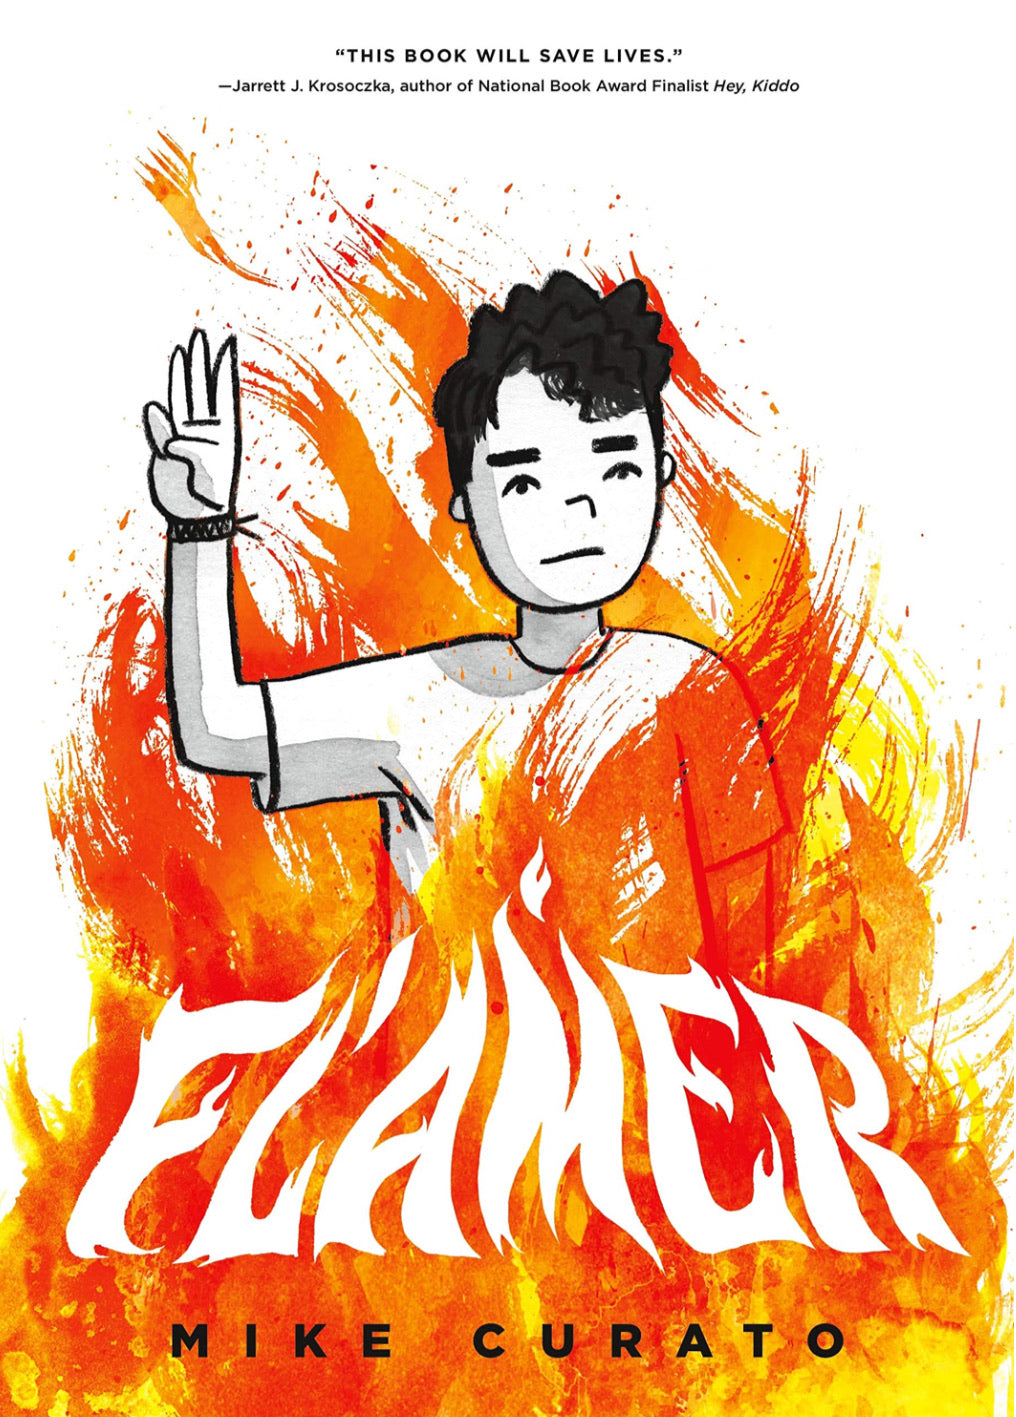 Flamer [Mike Curato]